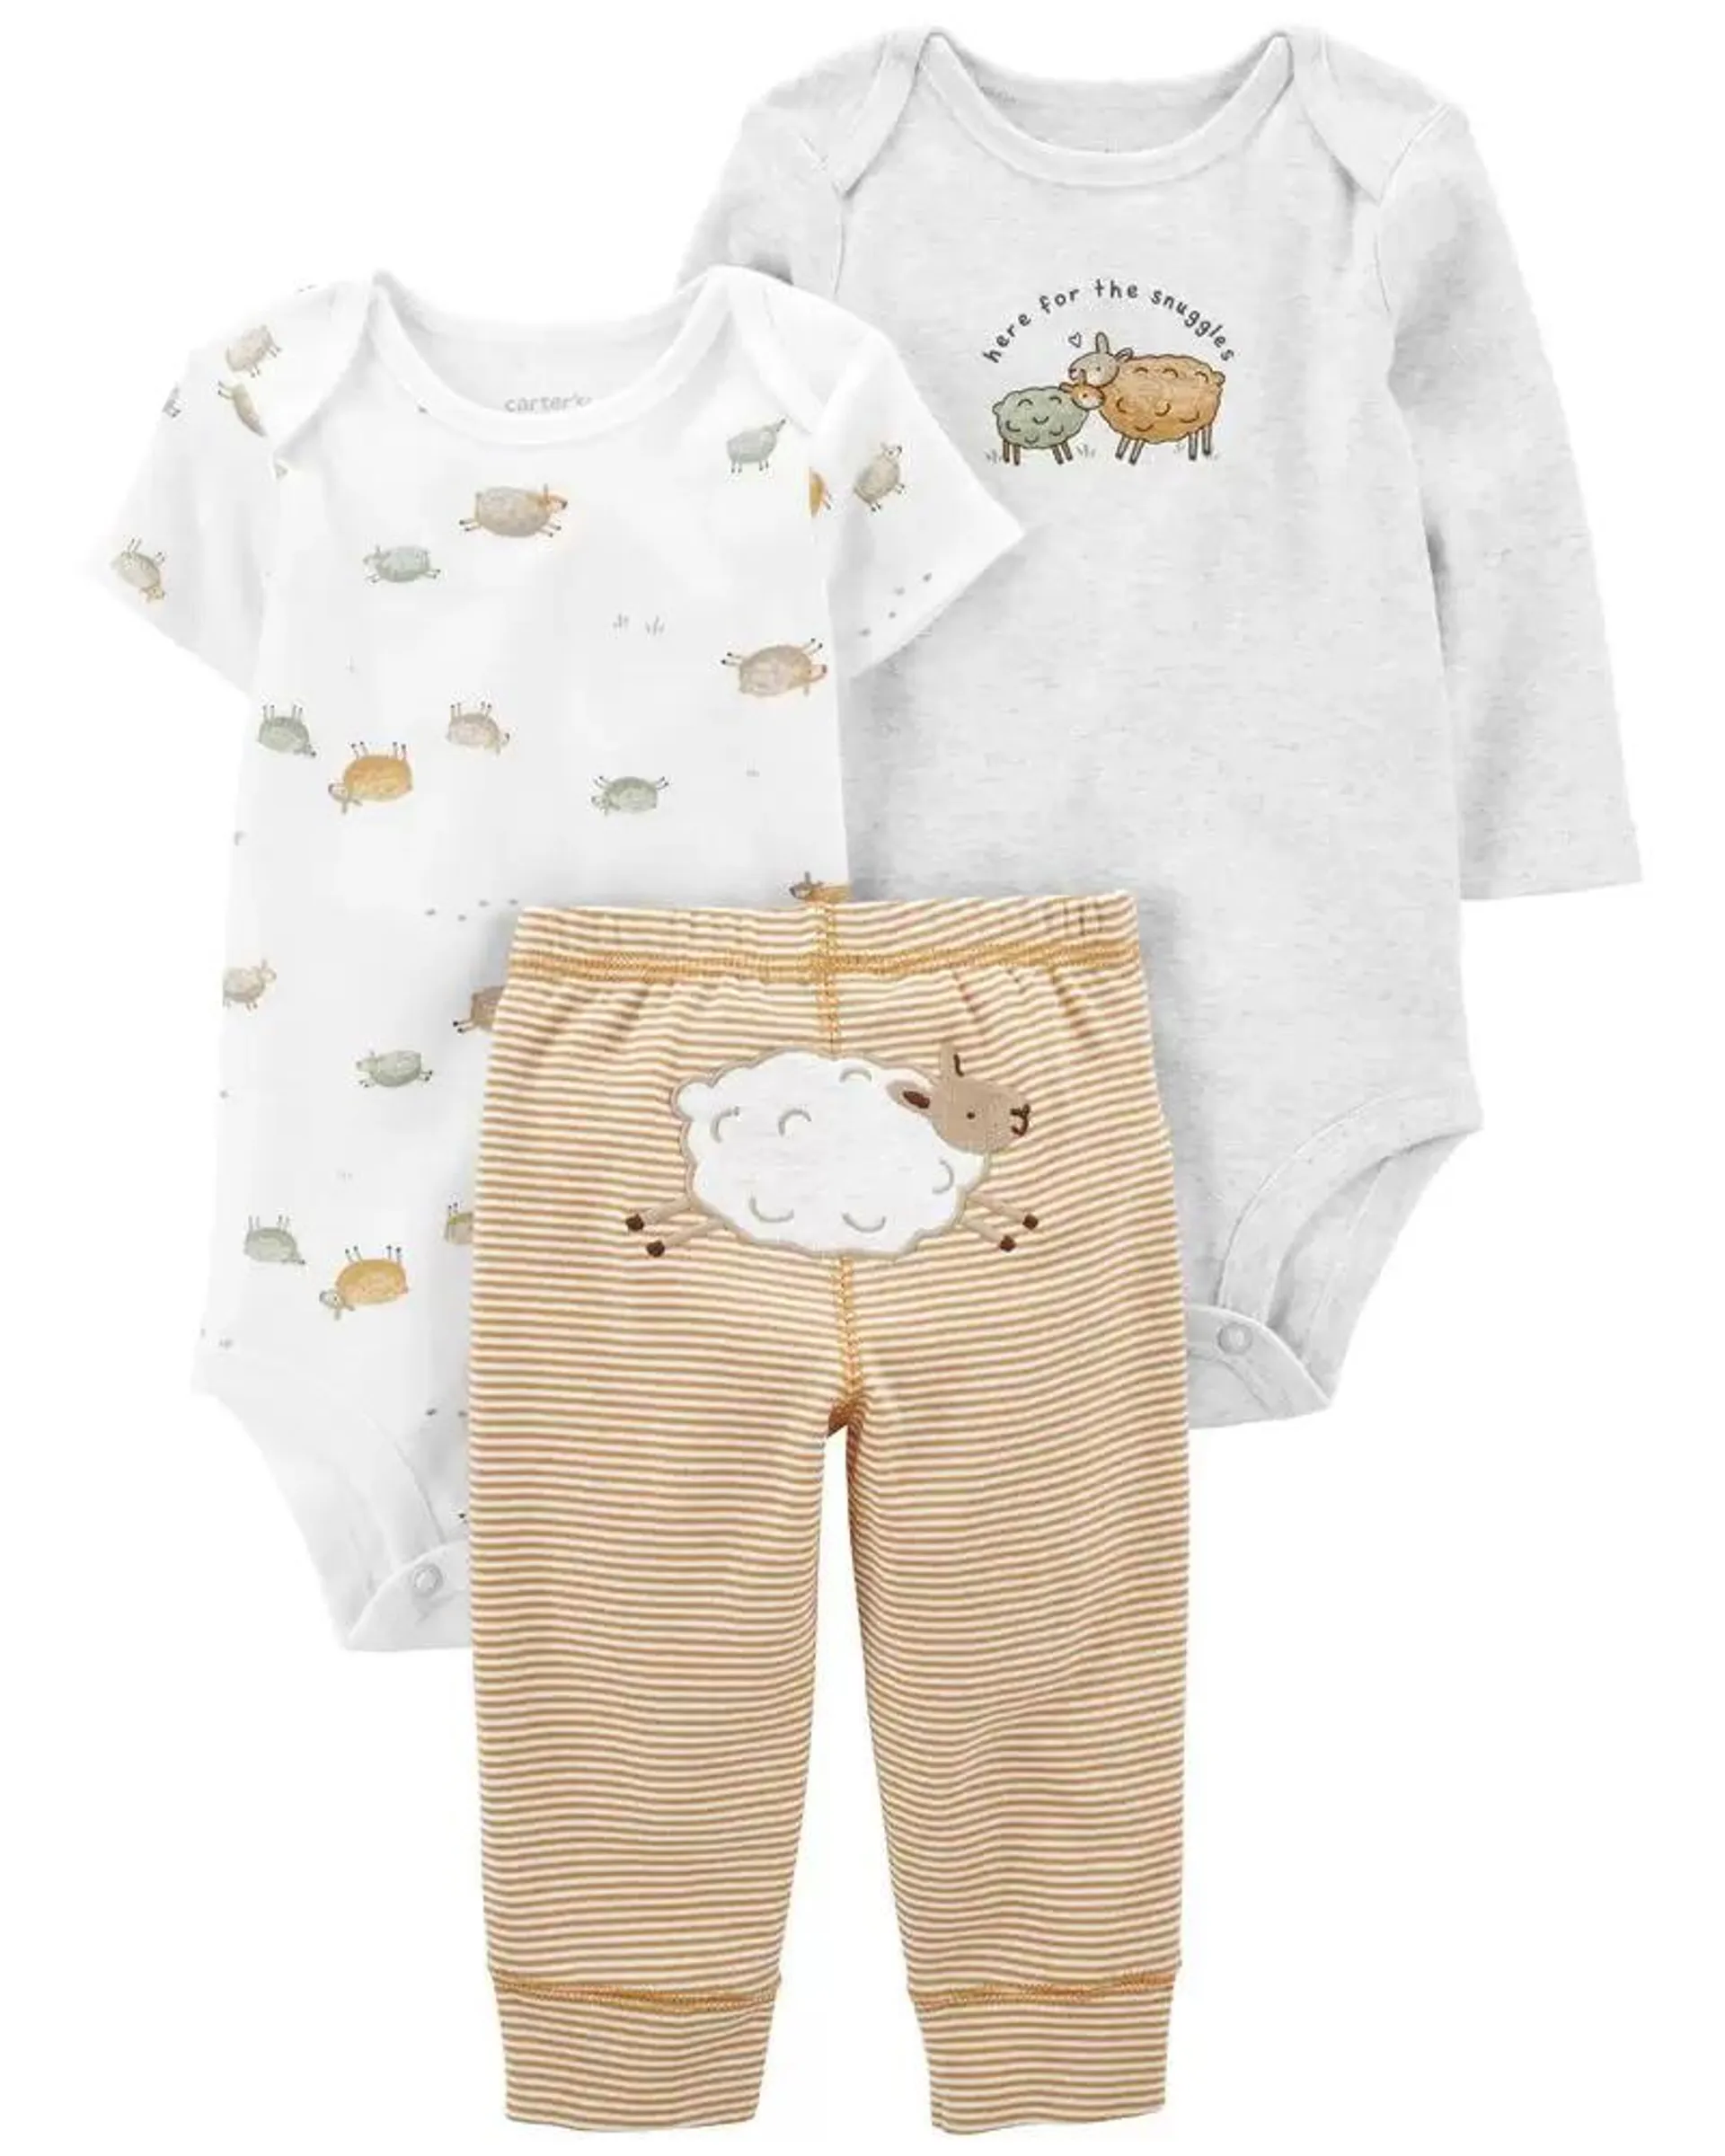 Baby 3-Piece Lamb Outfit Set